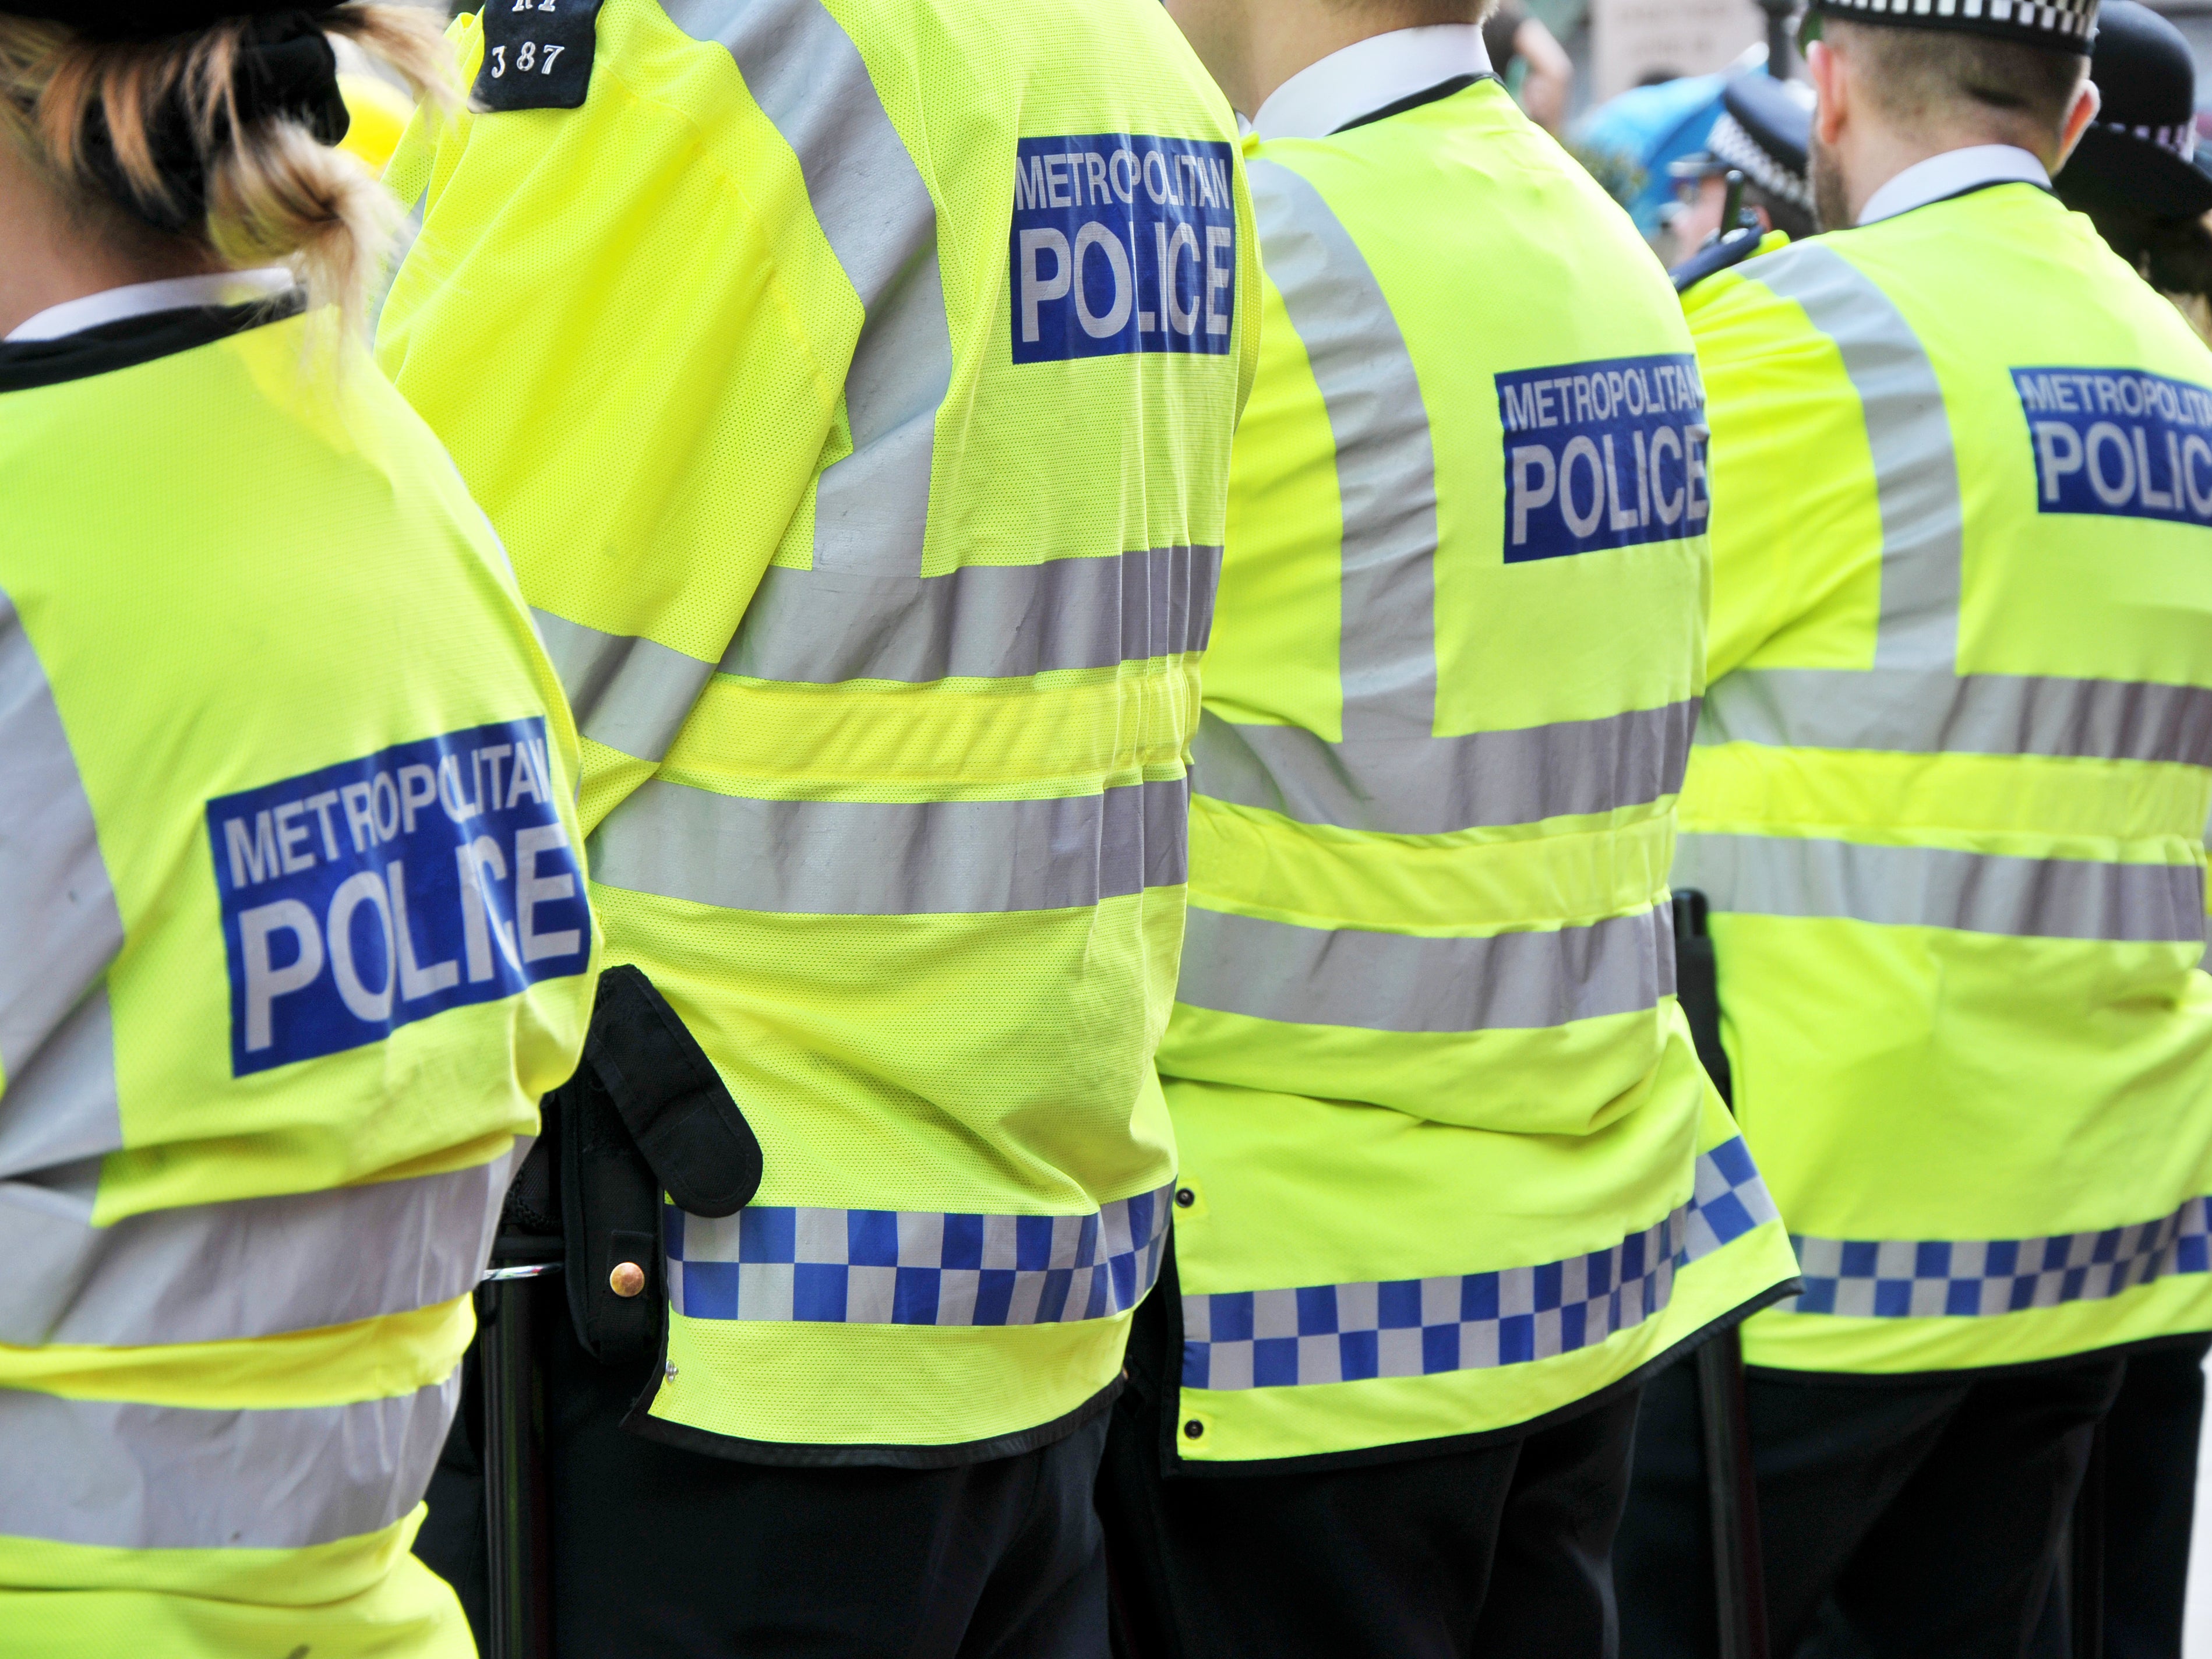 The Metropolitan Police is receiving less than half of the applications it needs for uniformed PCs